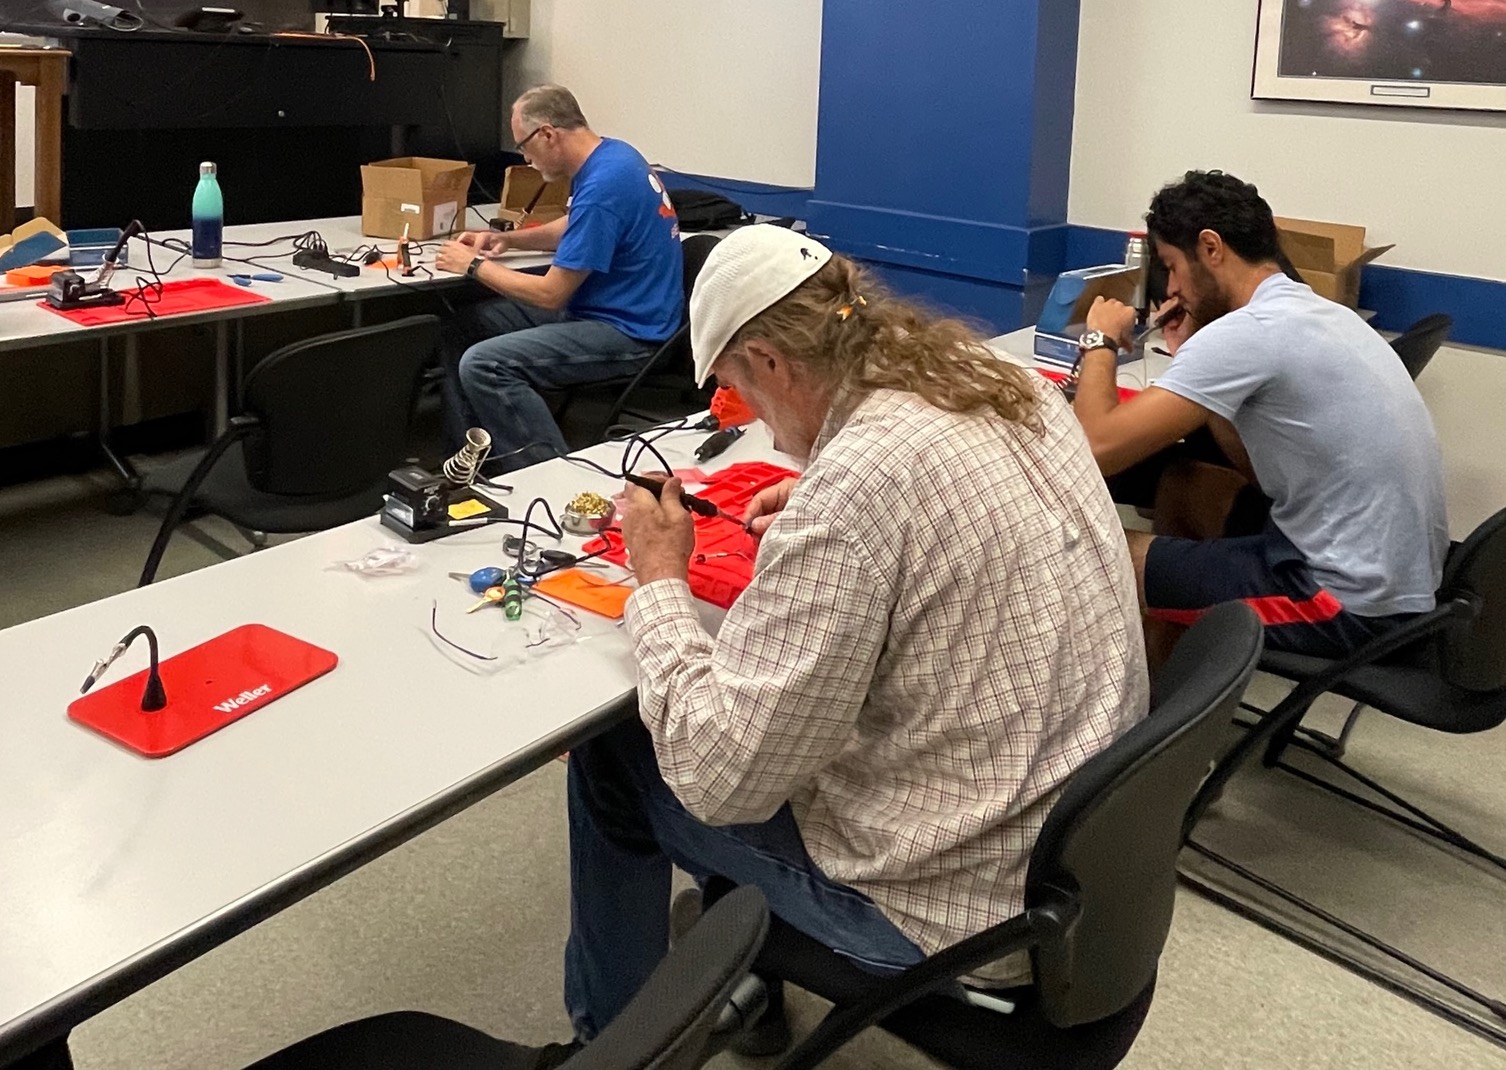 Three men shown from behind working at soldering stations to build LightSound devices at a UT Austin LightSound workshop.